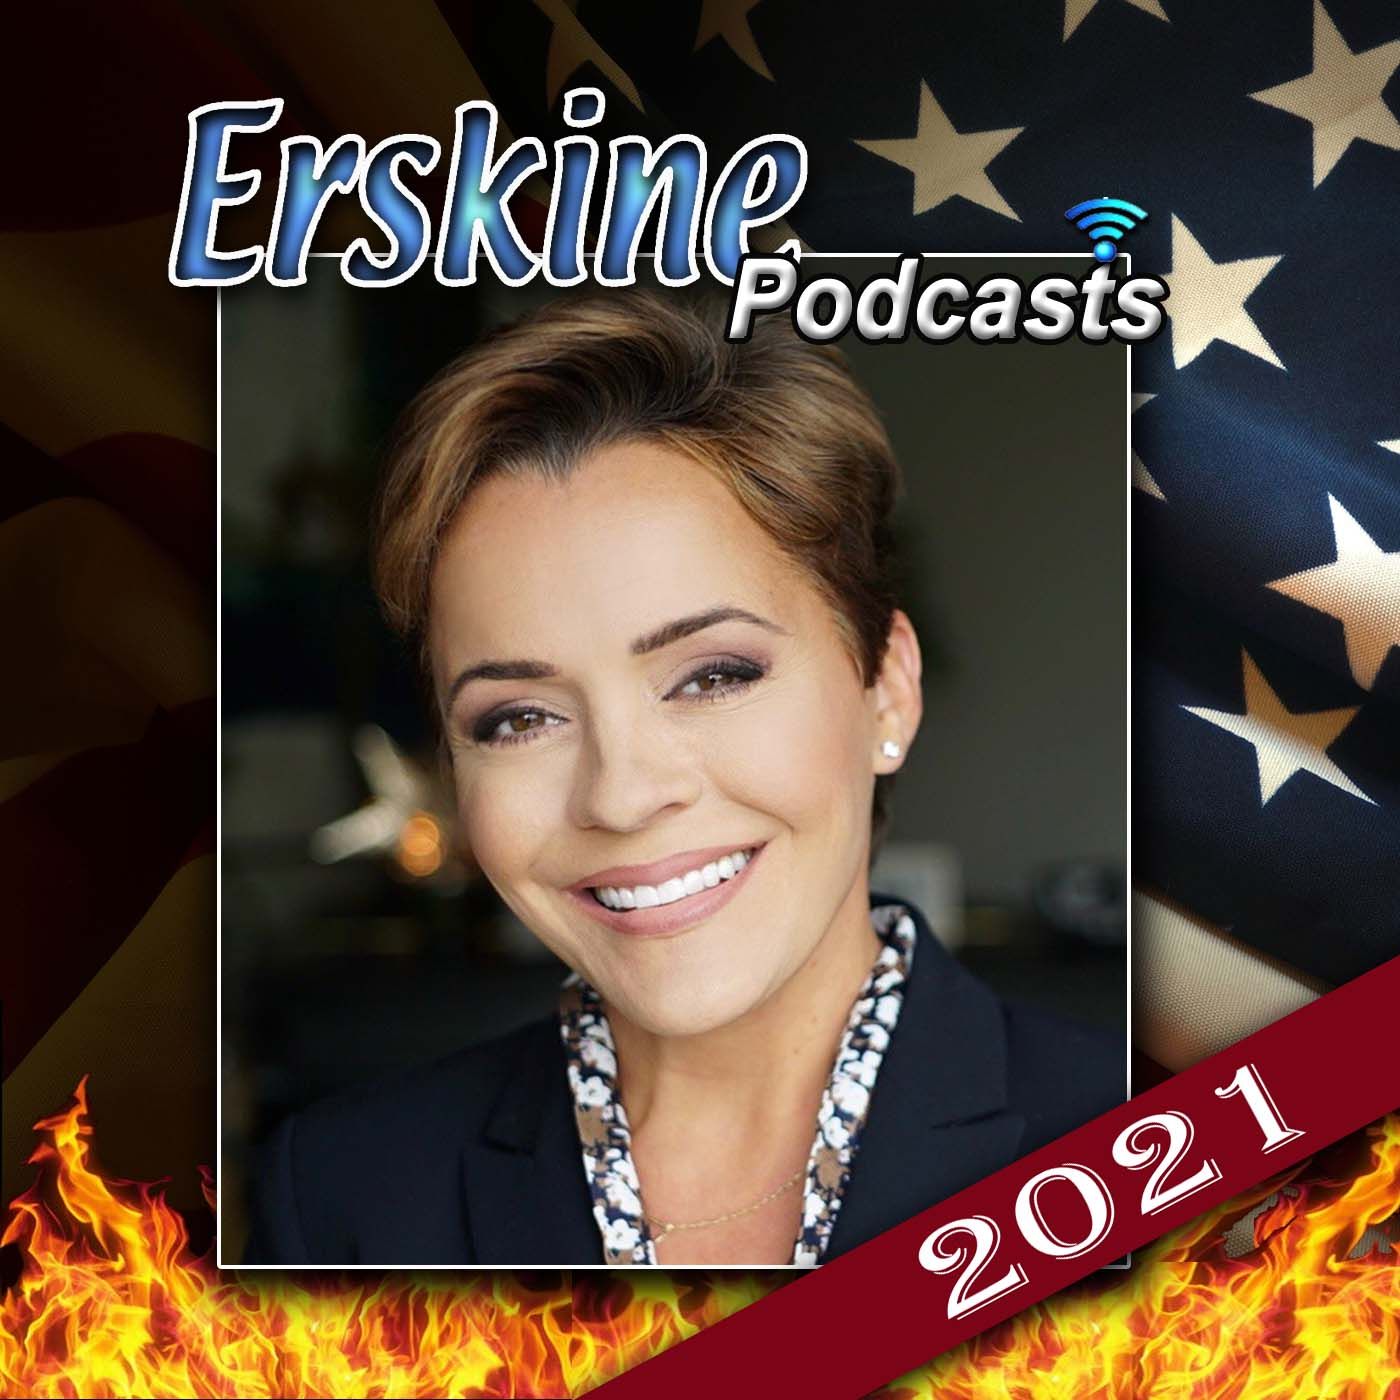 Kari Lake - AZ Gubernatorial candidate for 2022 on issues for the country (ep #10-30-21)